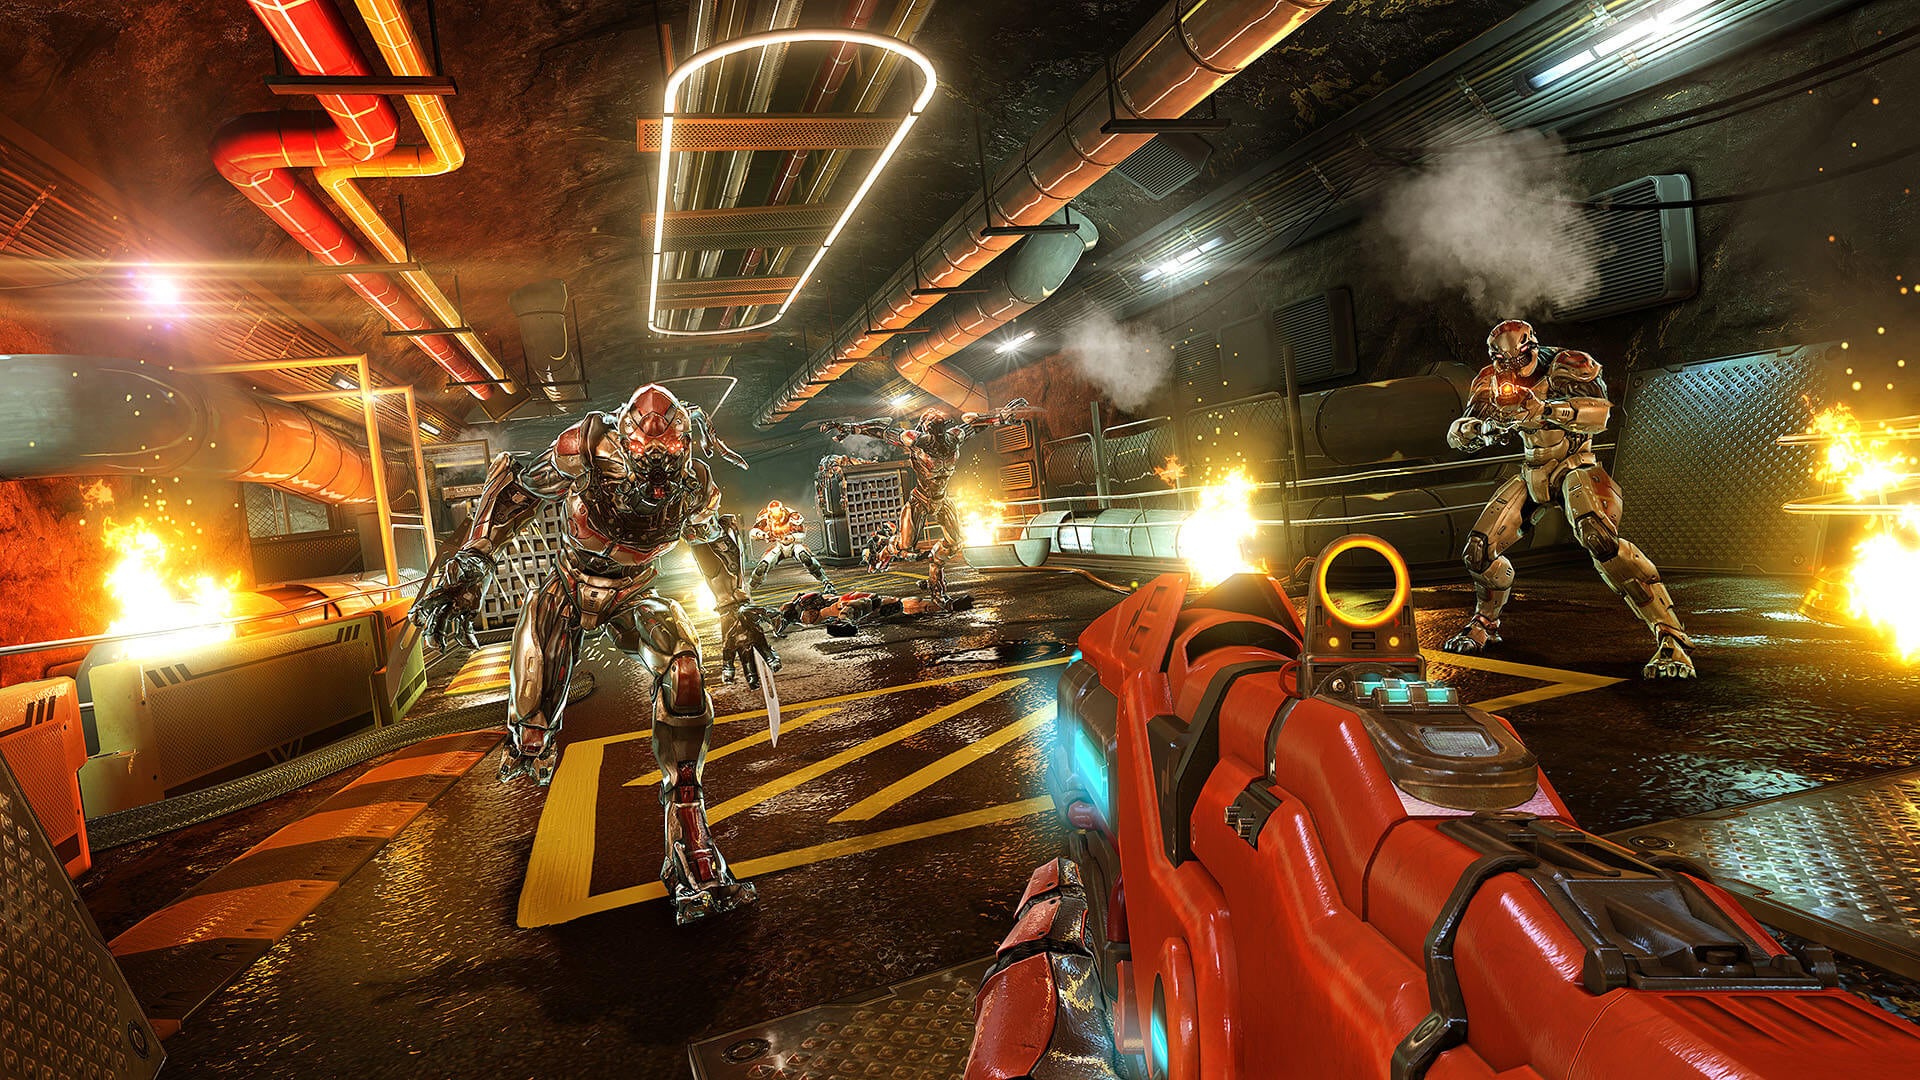 New Shadowgun Legends gameplay footage shows the dazzling graphics possible on current smartphones